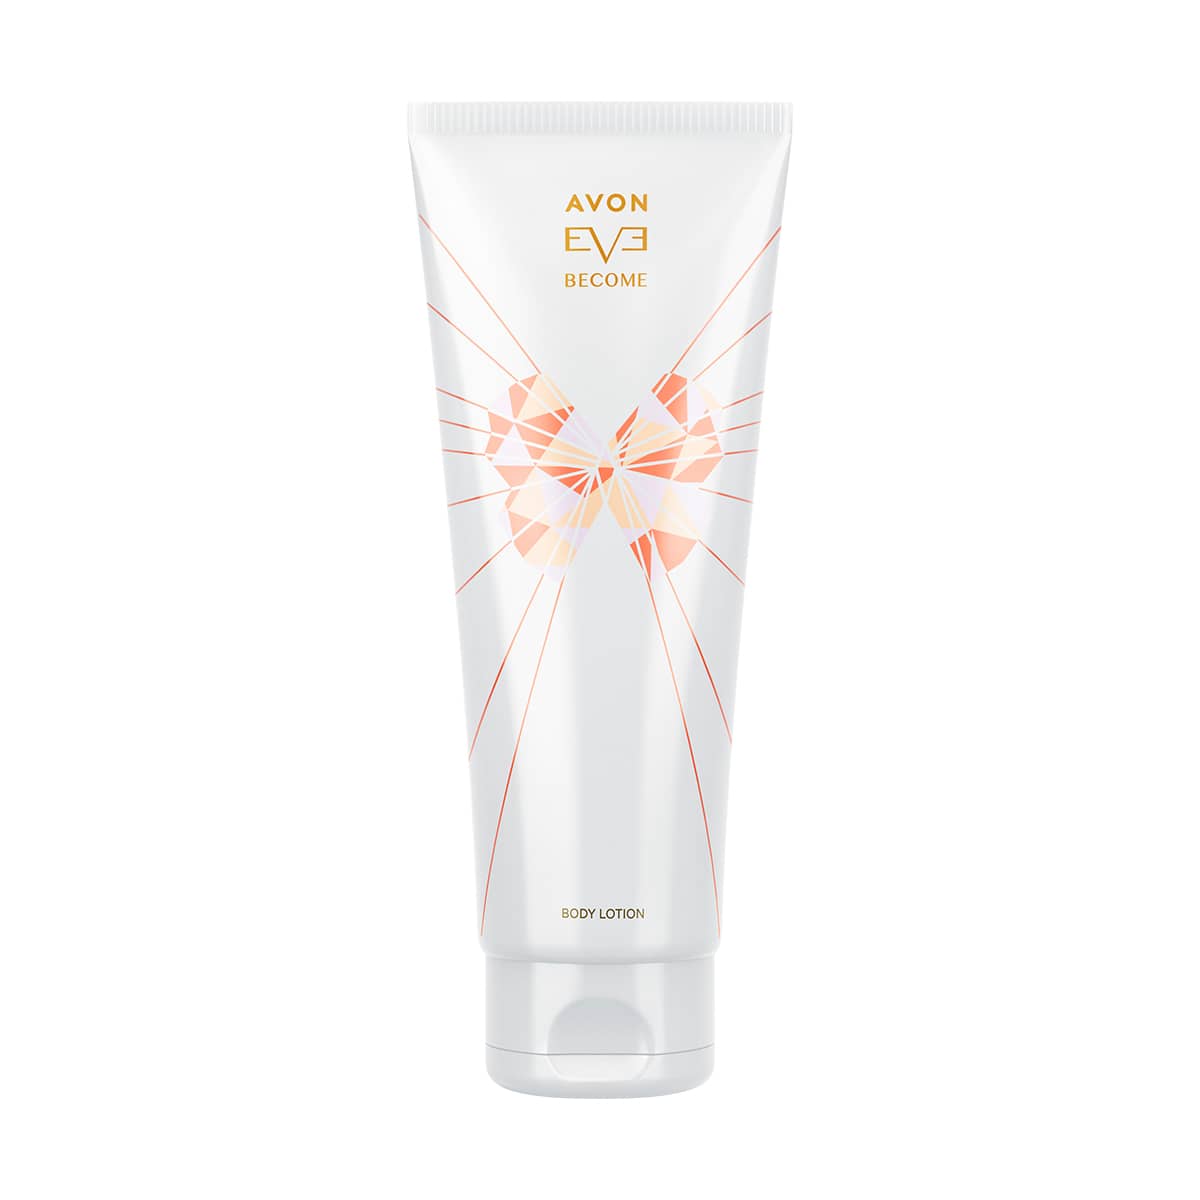 Eve Become Body Lotion 125ml